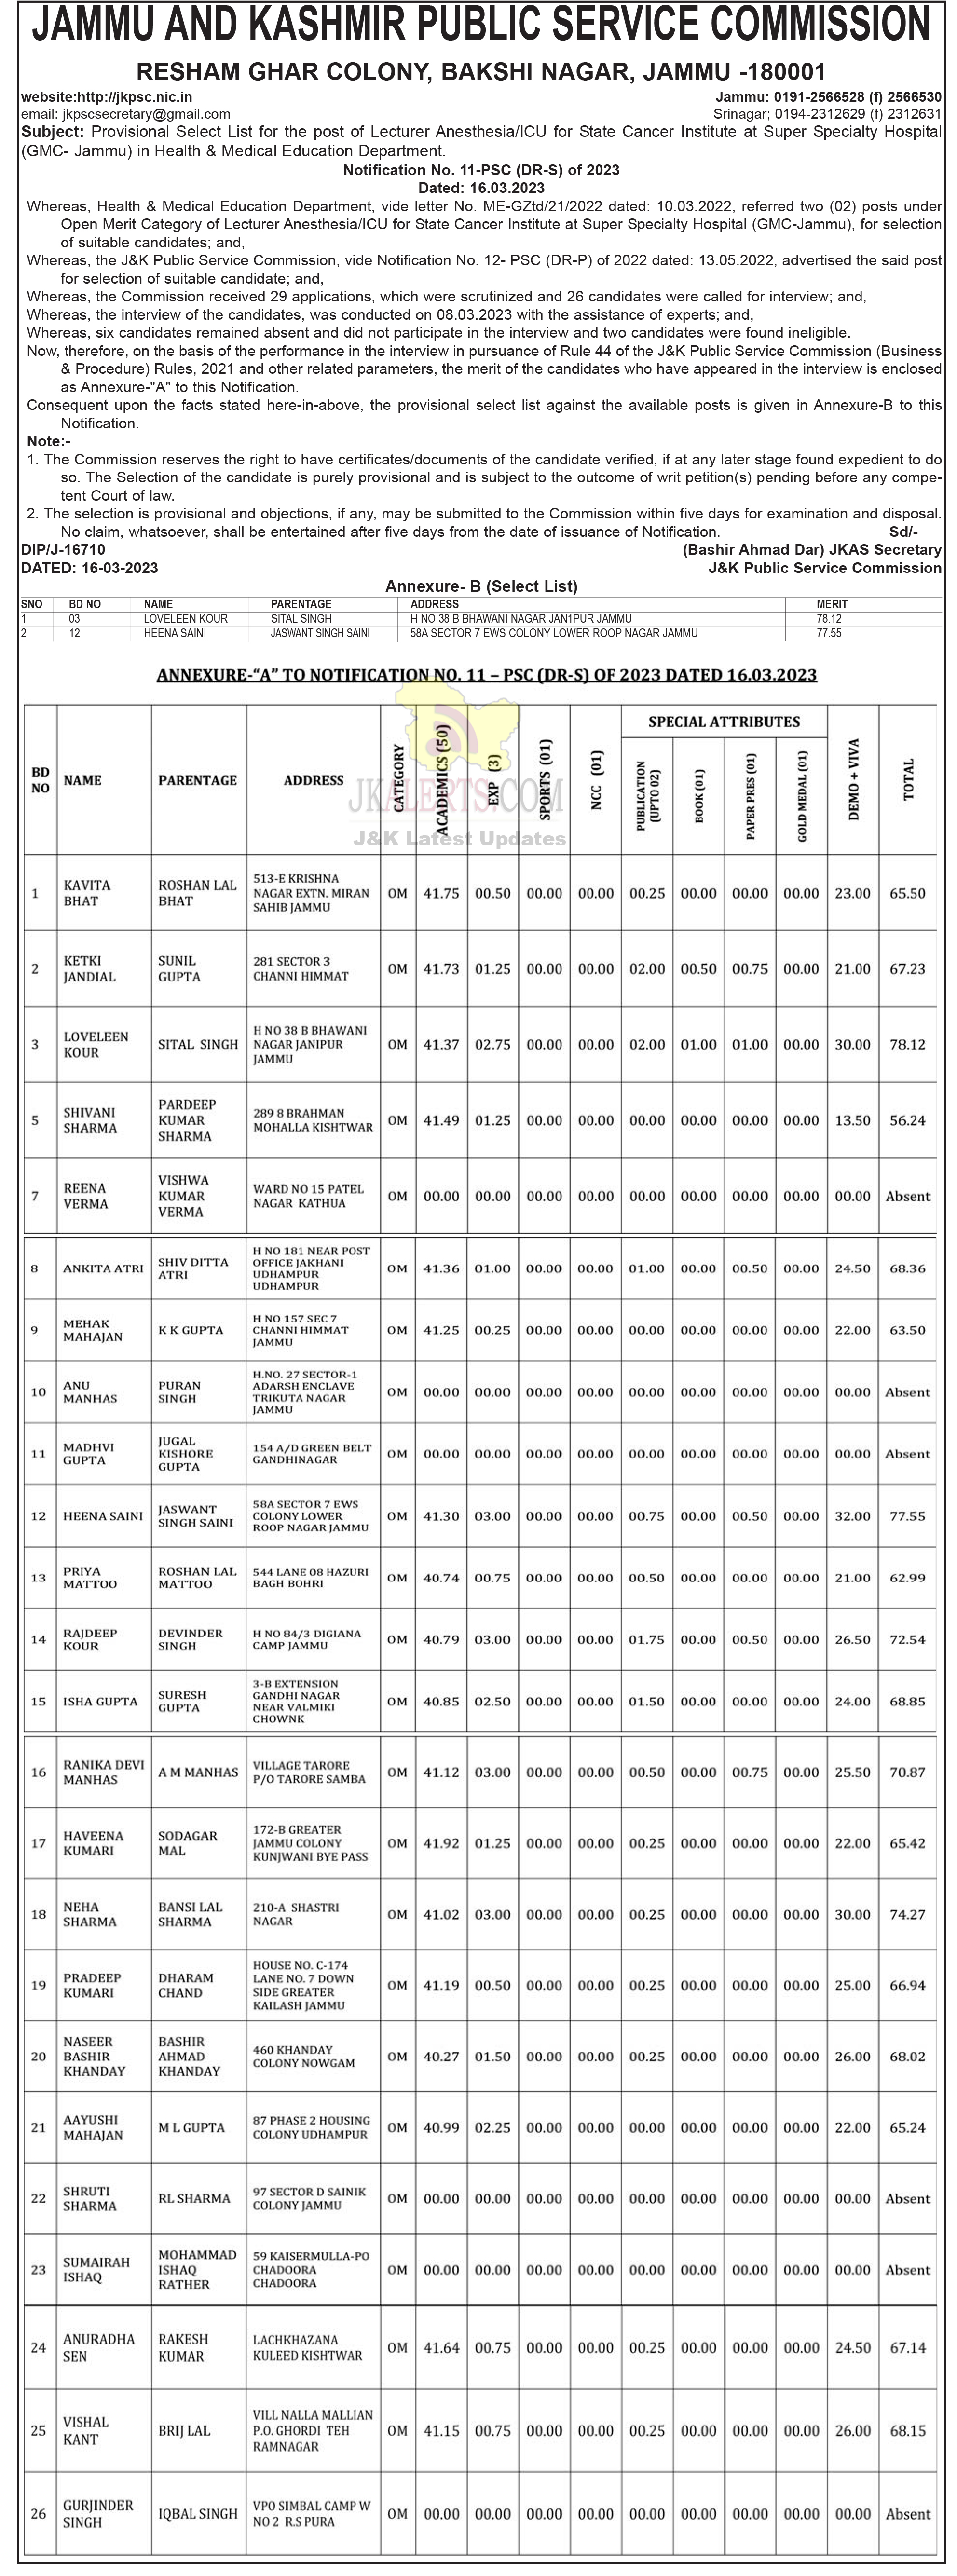 JKPSC Selection list for Lecturer Anesthesia/ICU